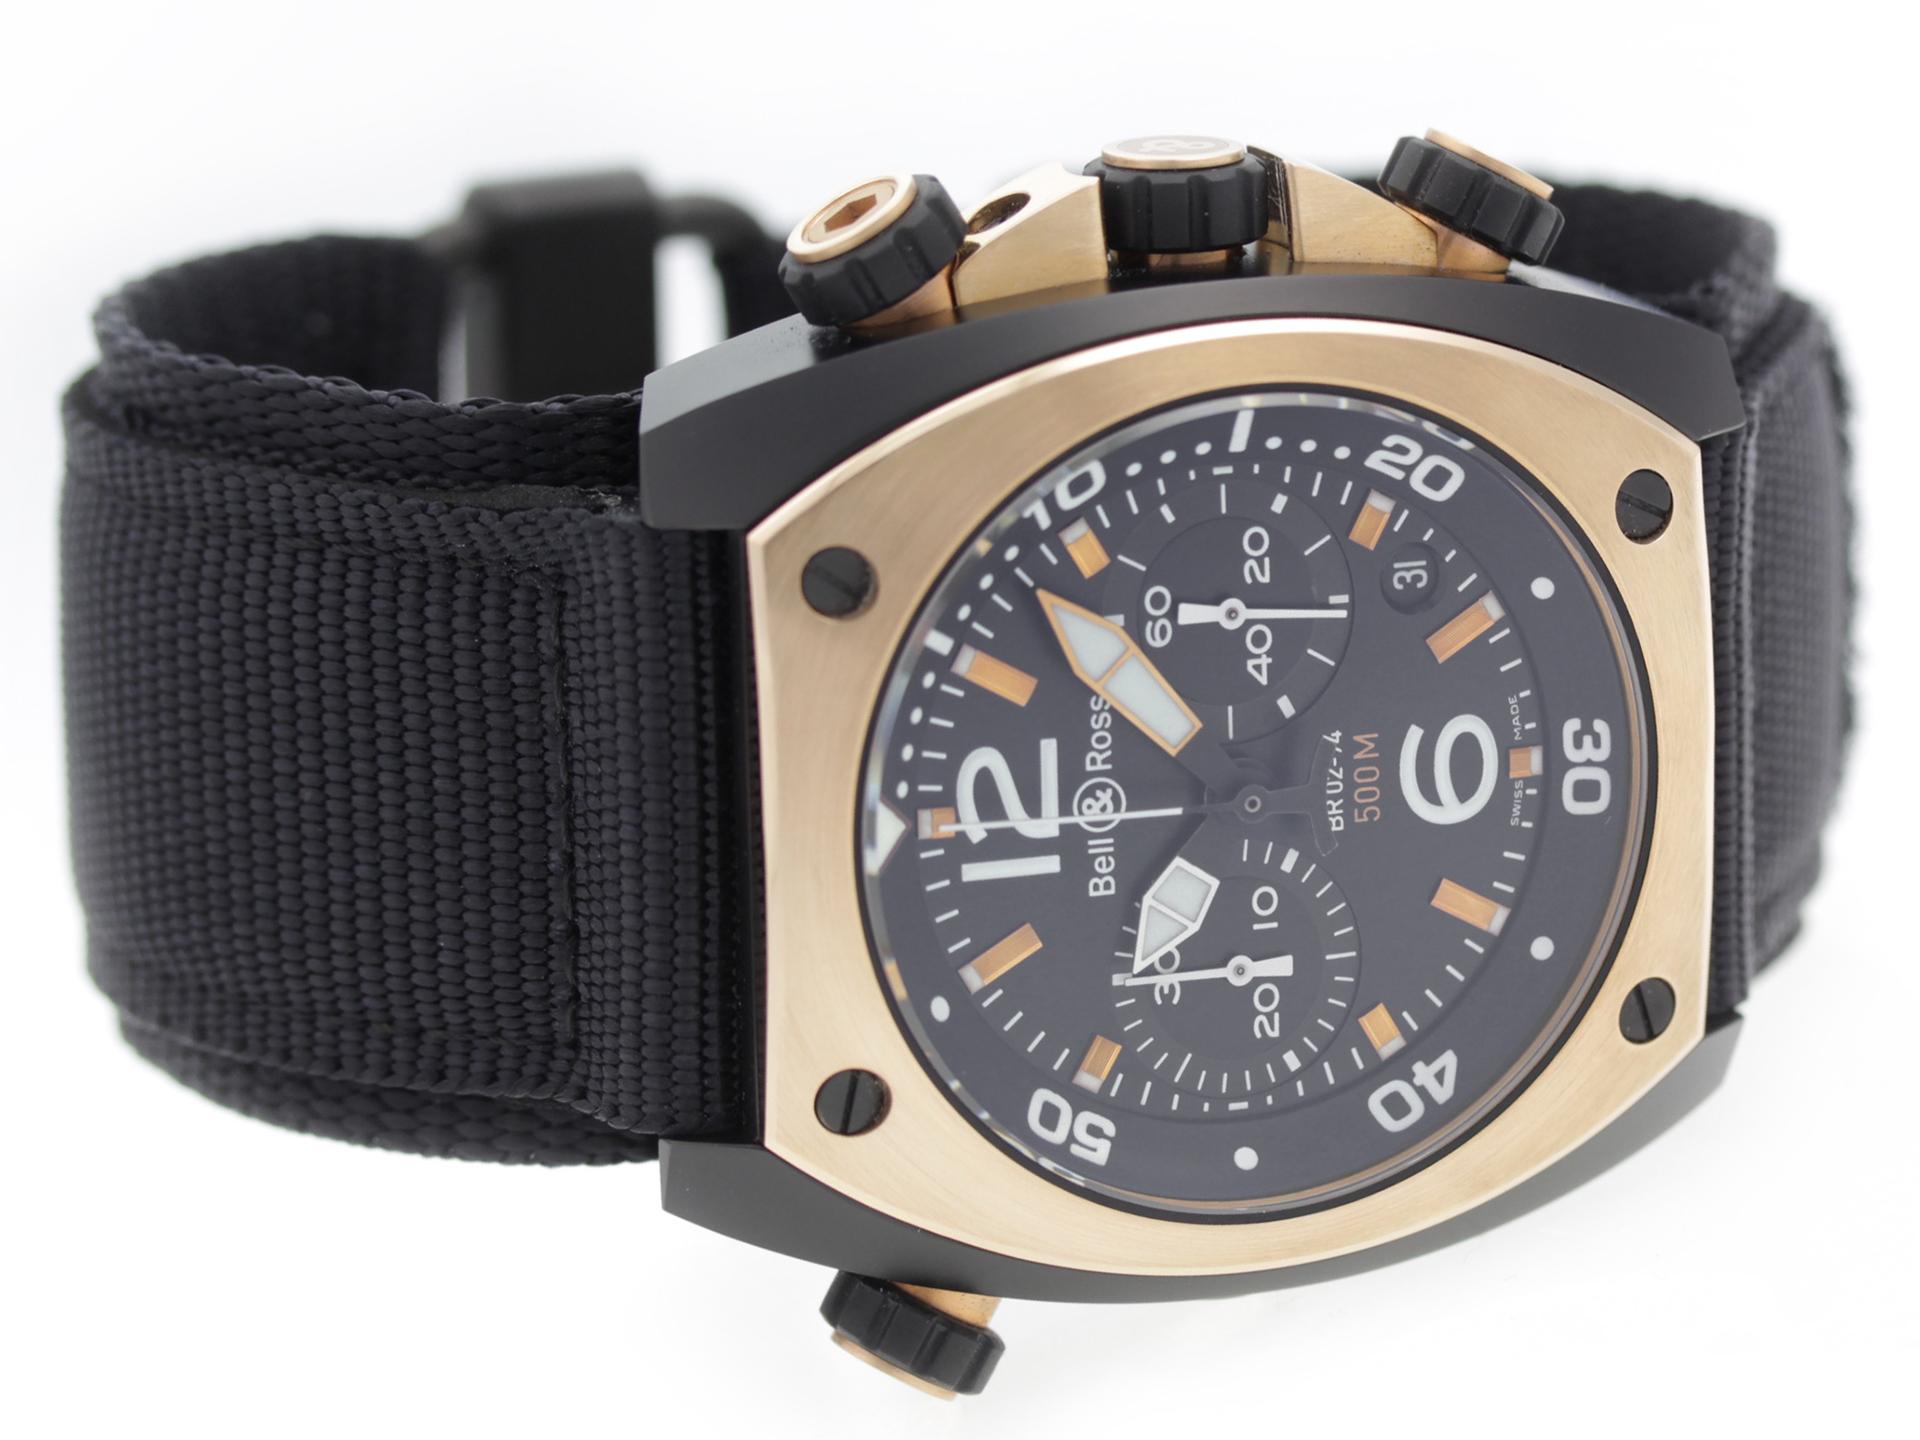 18K Rose Gold & PVD Steel Bell & Ross Marine 94 BR02-CHR-BICOLOR watch, water resistance to 500m, with date, chronograph, and nylon strap.

Watch	
Brand:	Bell & Ross
Series:	Marine 94
Model #:	BR02-CHR-BICOLOR
Gender:	Men’s
Condition:	Excellent